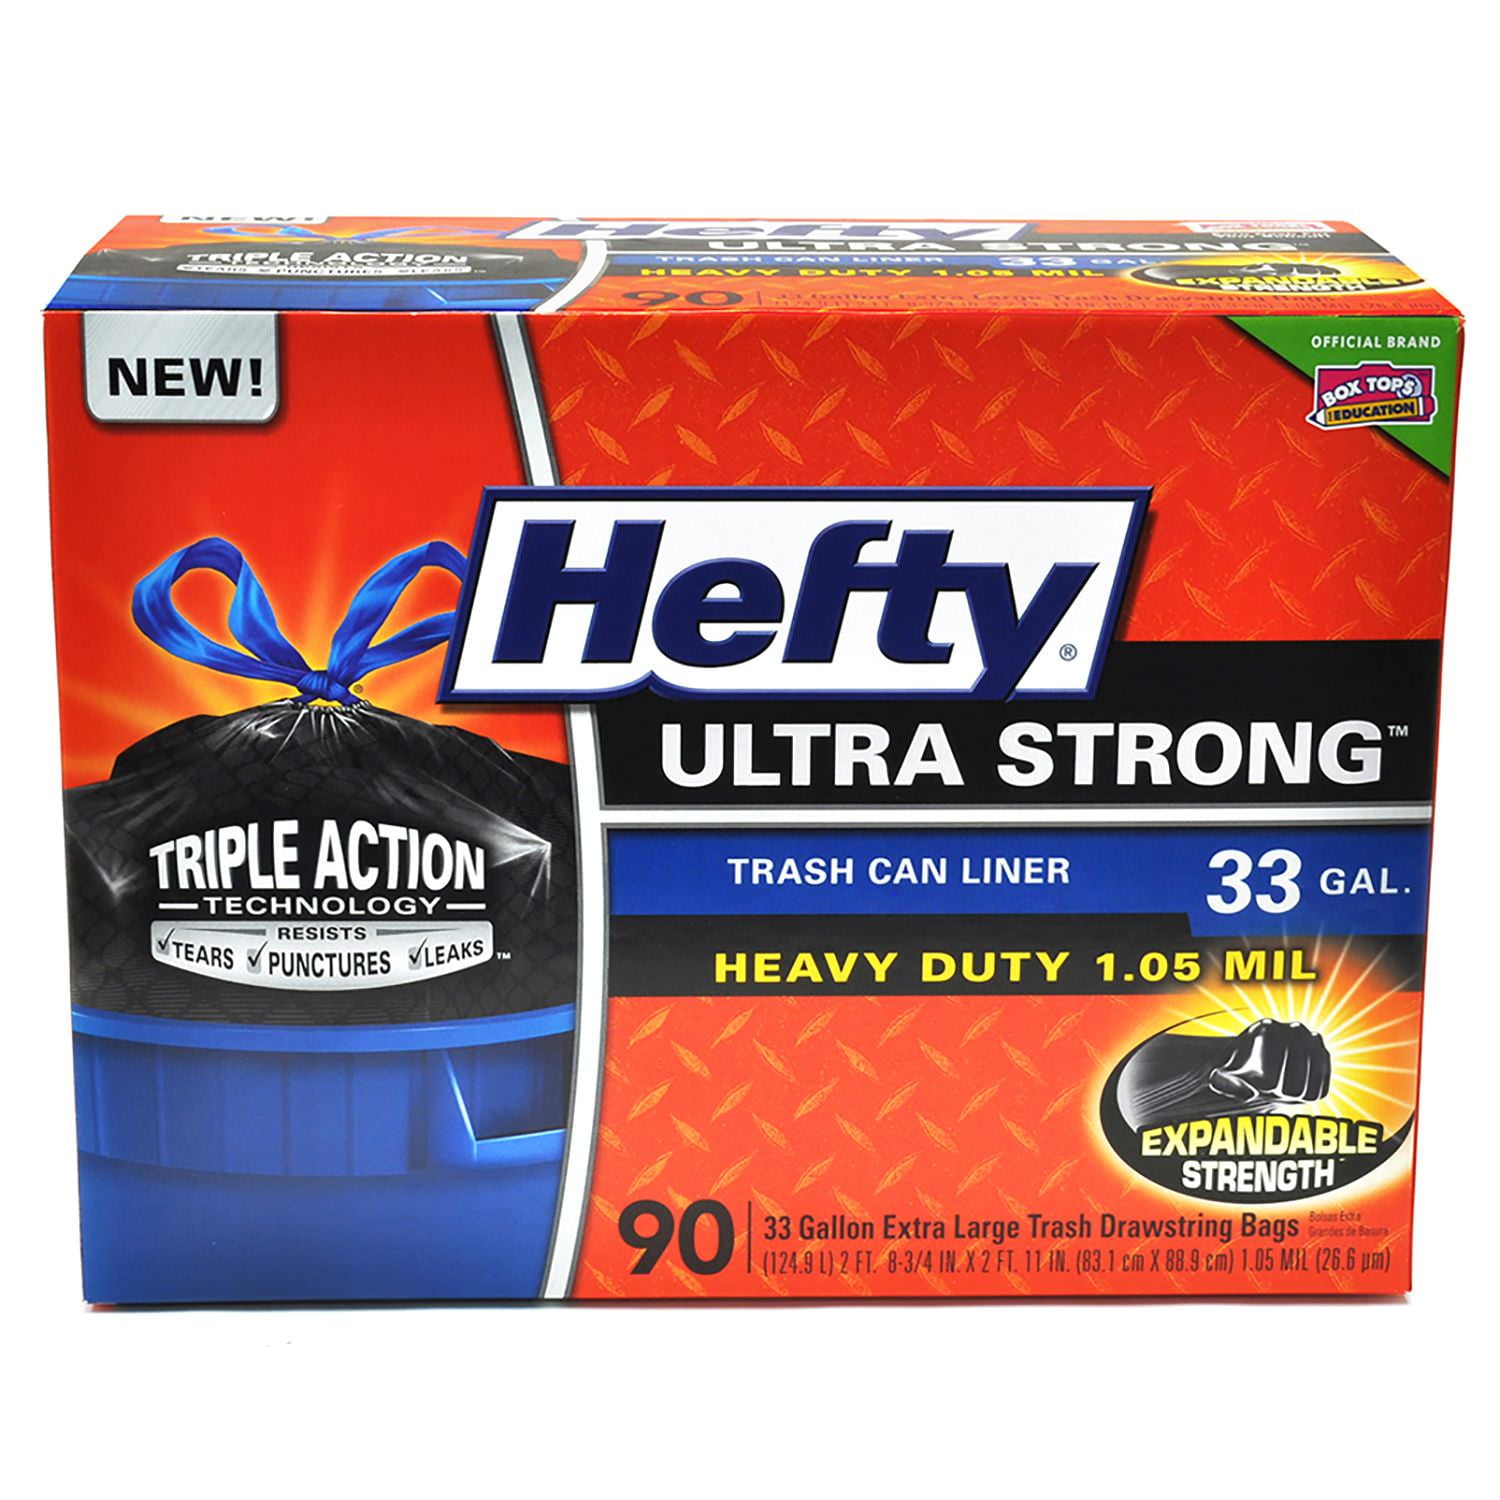 Hefty Ultra Strong Large Trash Bags, 33 Gallon, 40 Count